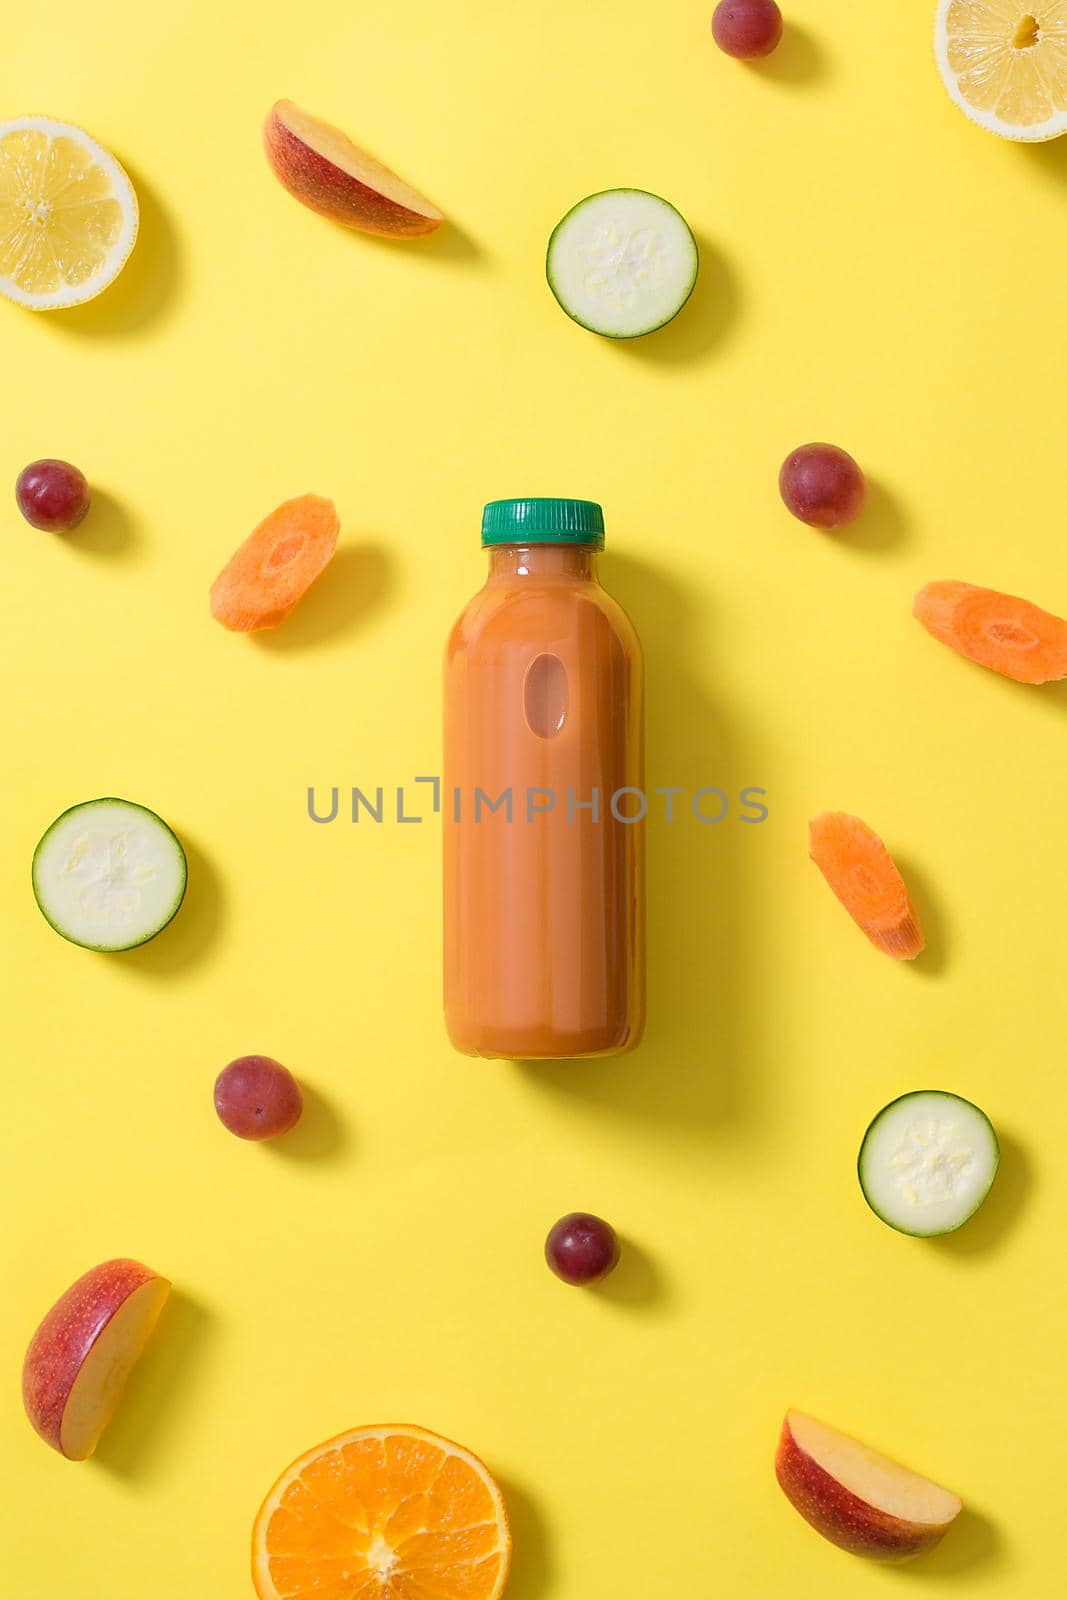 bottle of orange fruit and vegetable juice in the center of the image surrounded by pieces of fruits and vegetables of various colors on a yellow background